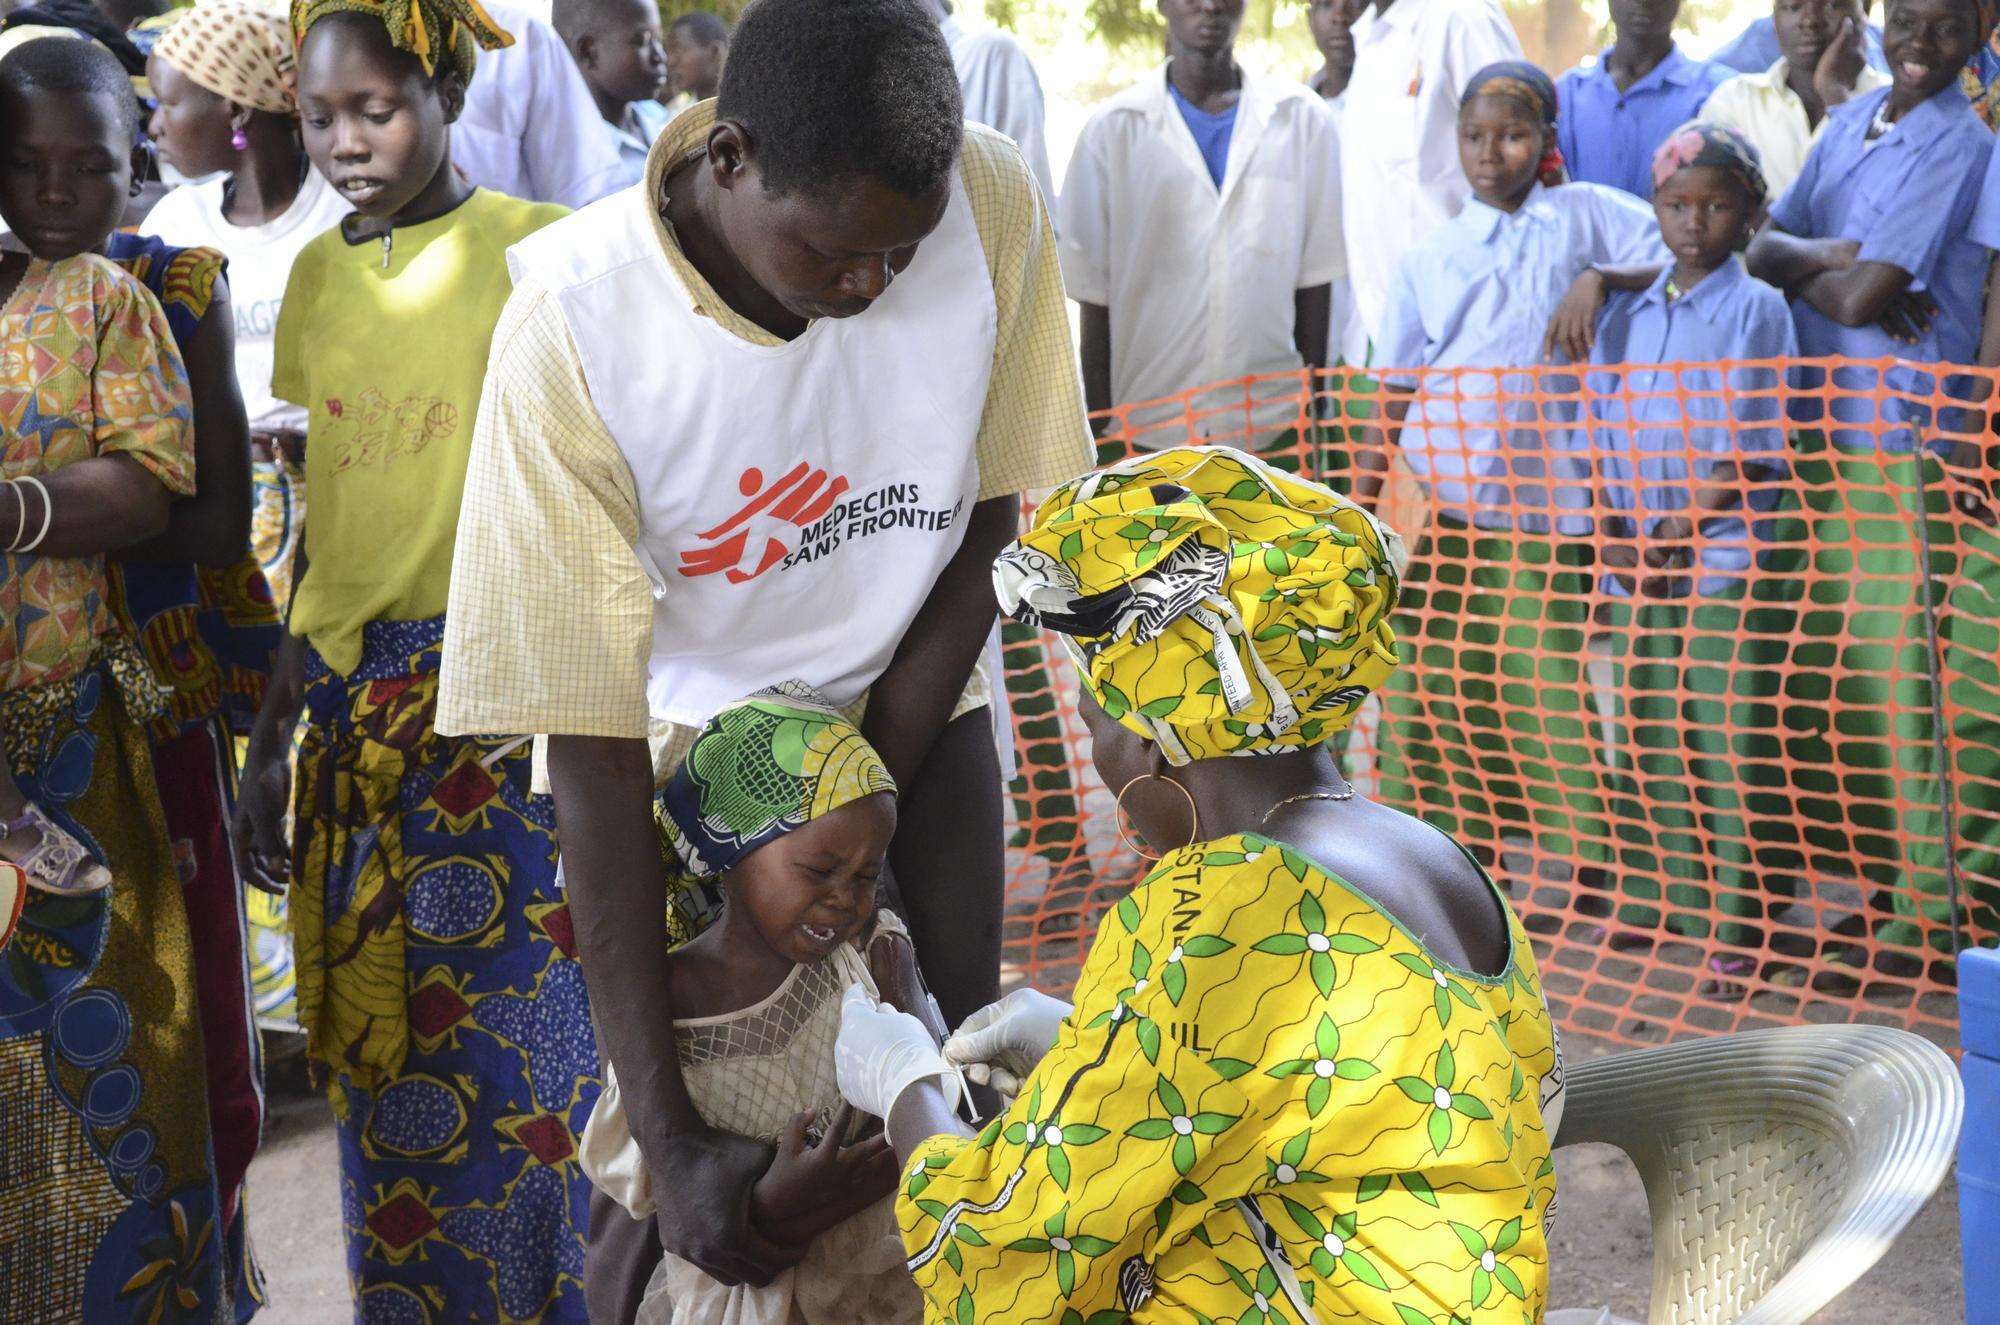 MSF staff provides comfort while a child receives meningitis vaccination